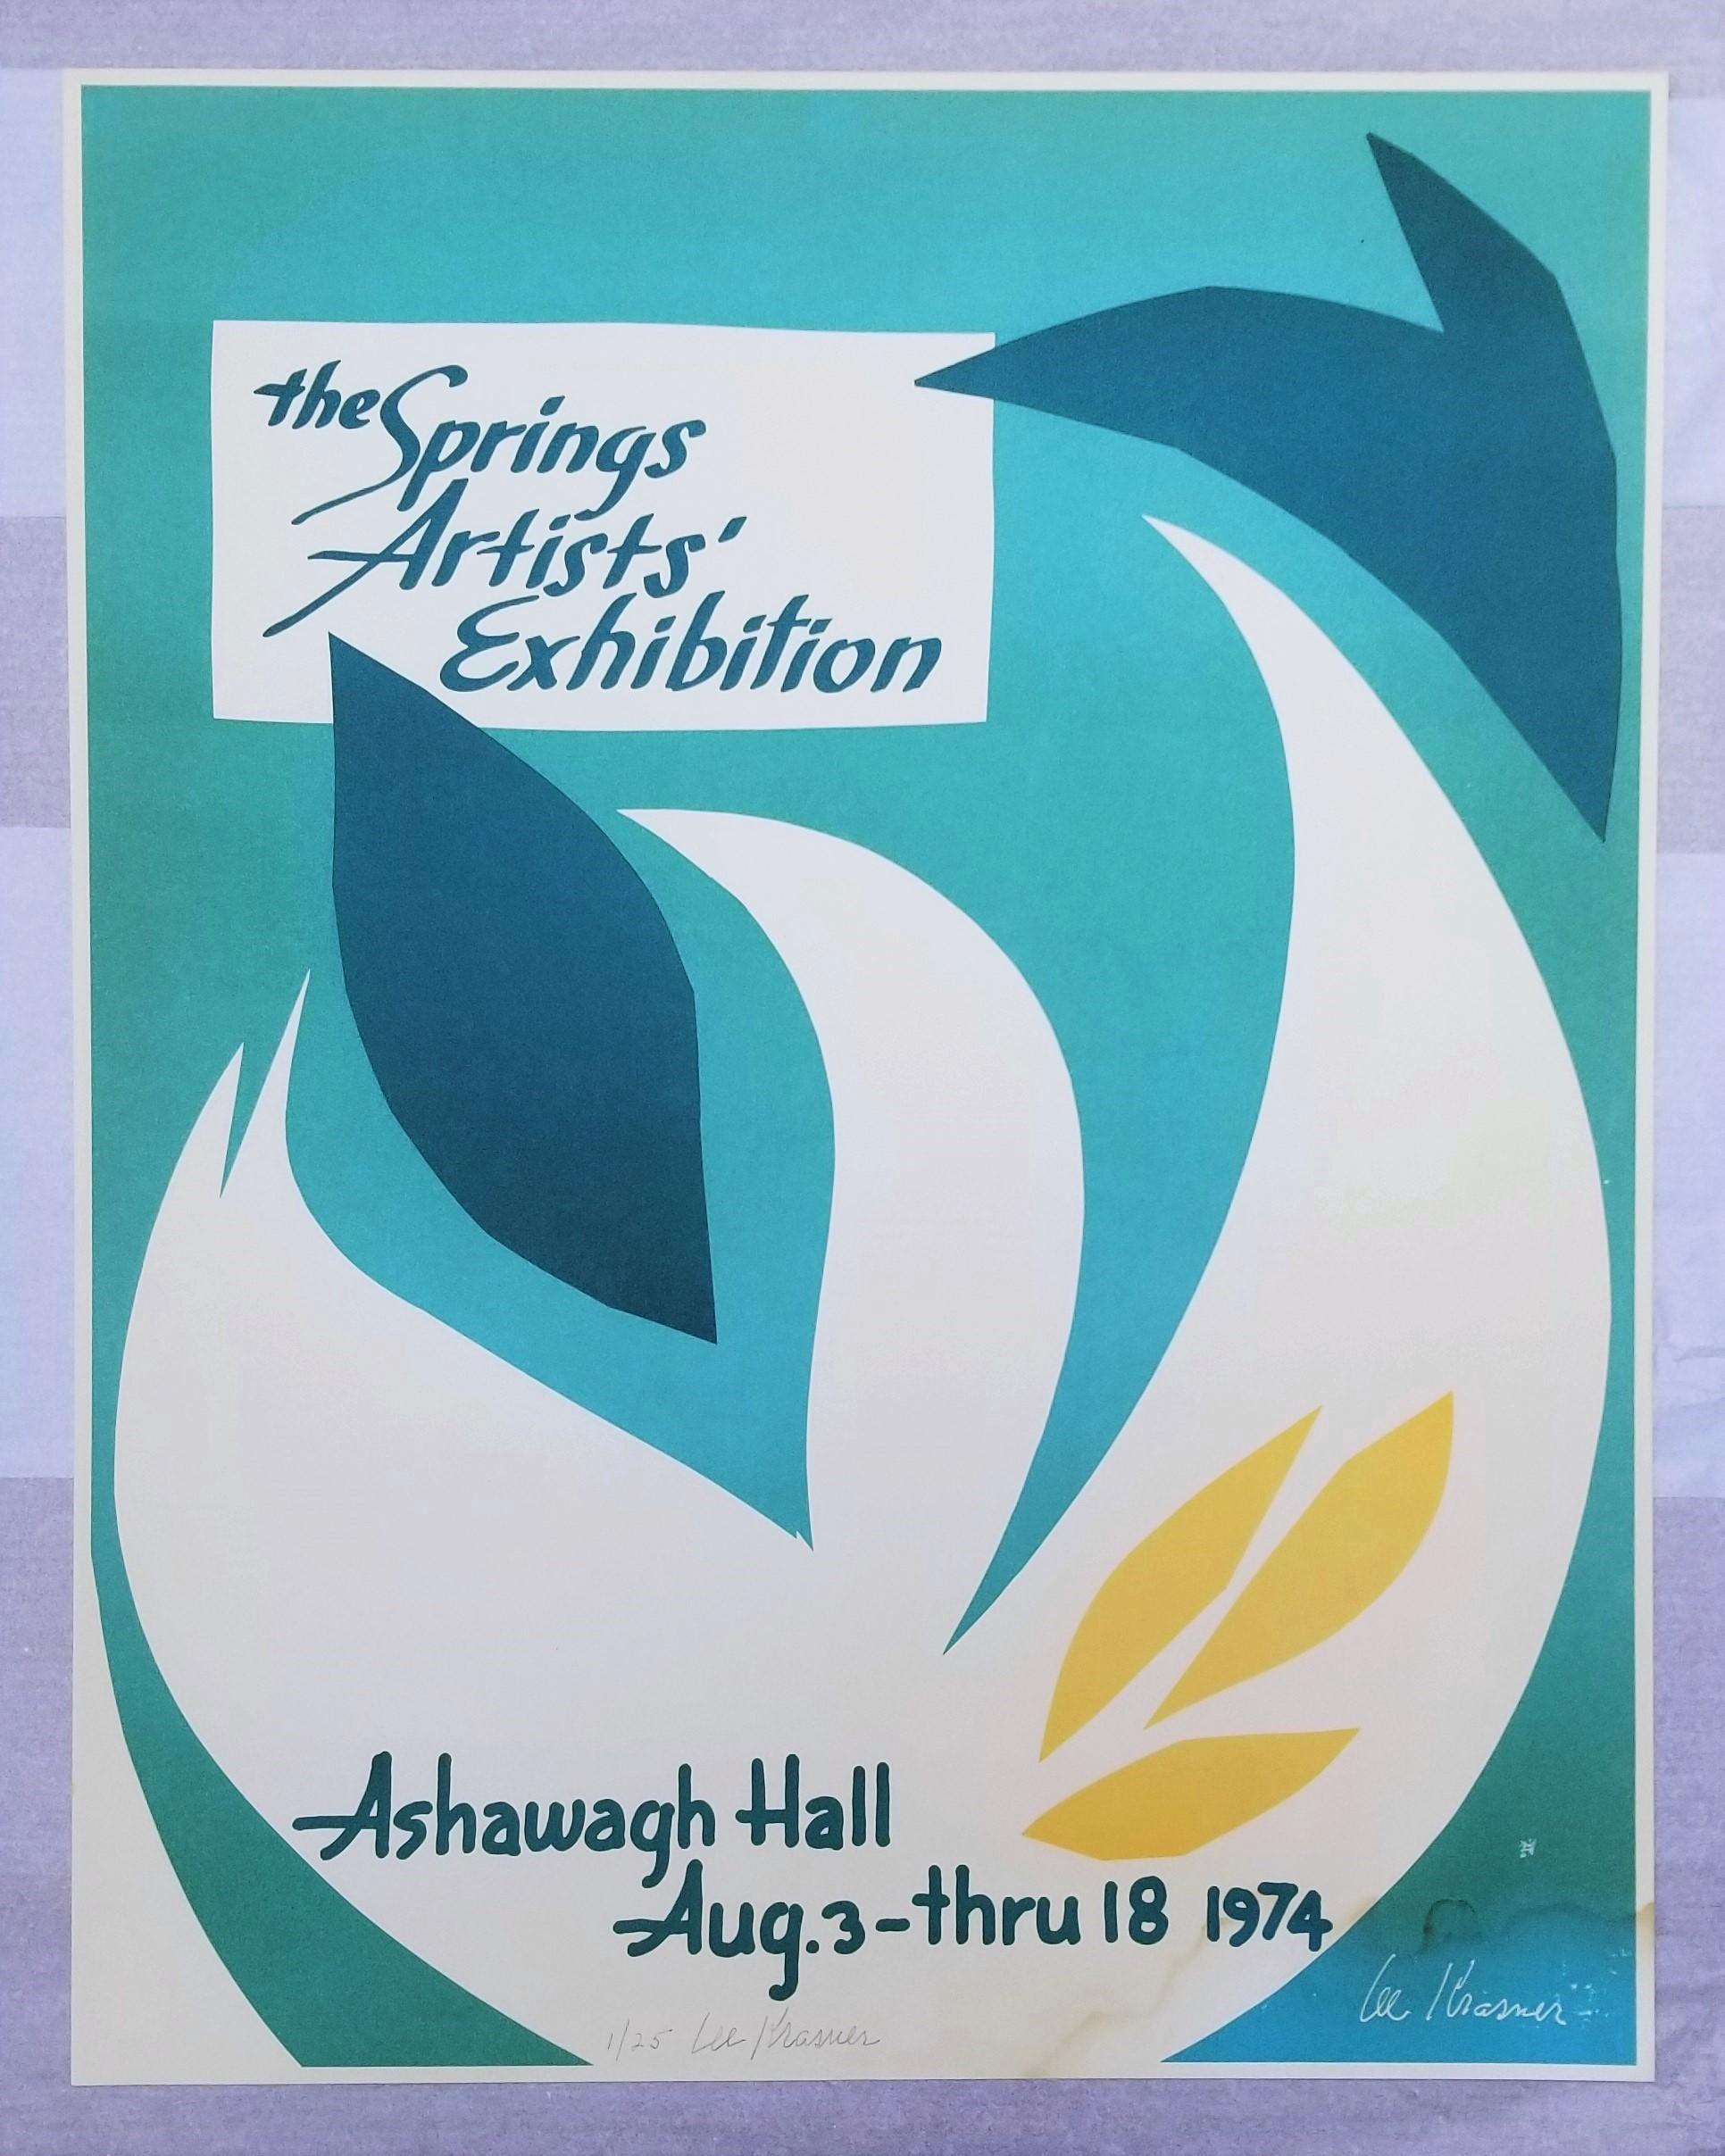 Ashawagh Hall: The Springs Artists' Exhibition Poster (Signed) /// Female Artist - Print by Lee Krasner